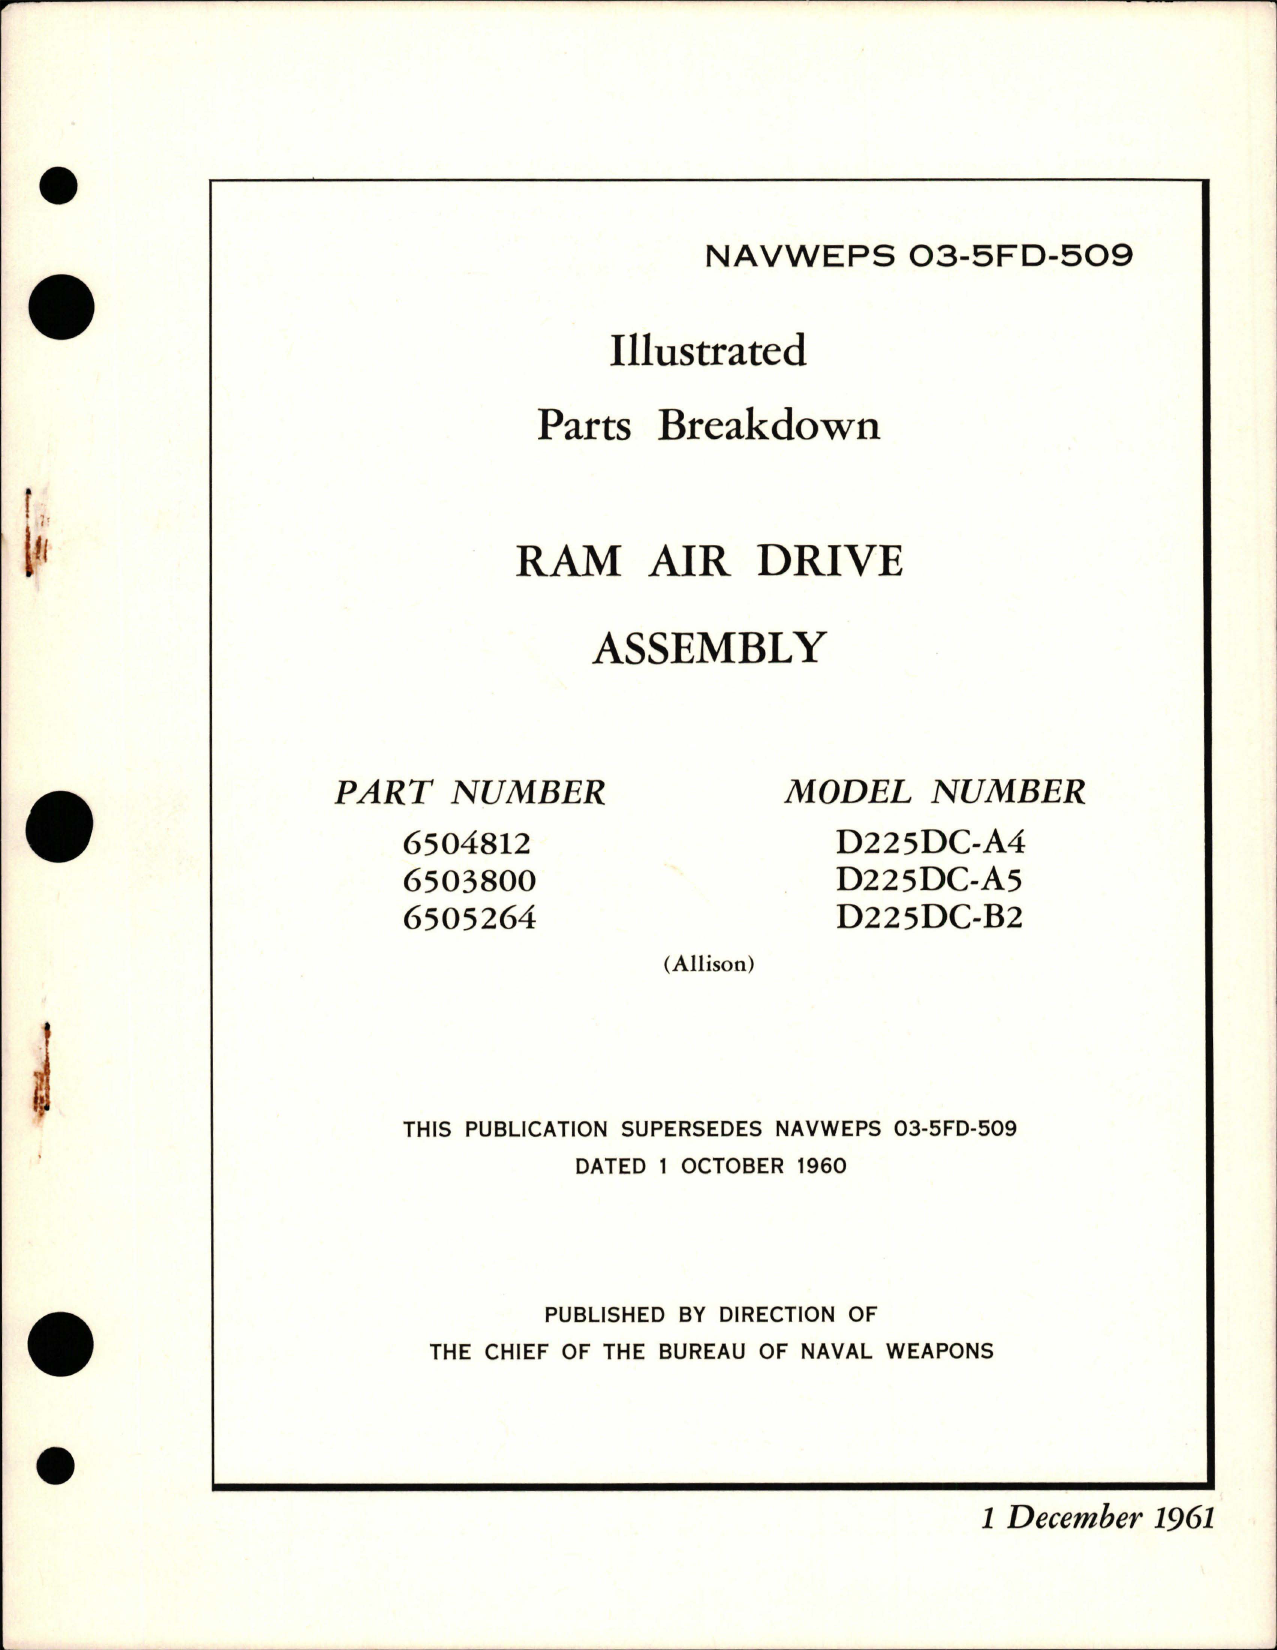 Sample page 1 from AirCorps Library document: Illustrated Parts Breakdown for Ram Air Drive Assembly - Parts 6504812, 6503800, and 6505264 